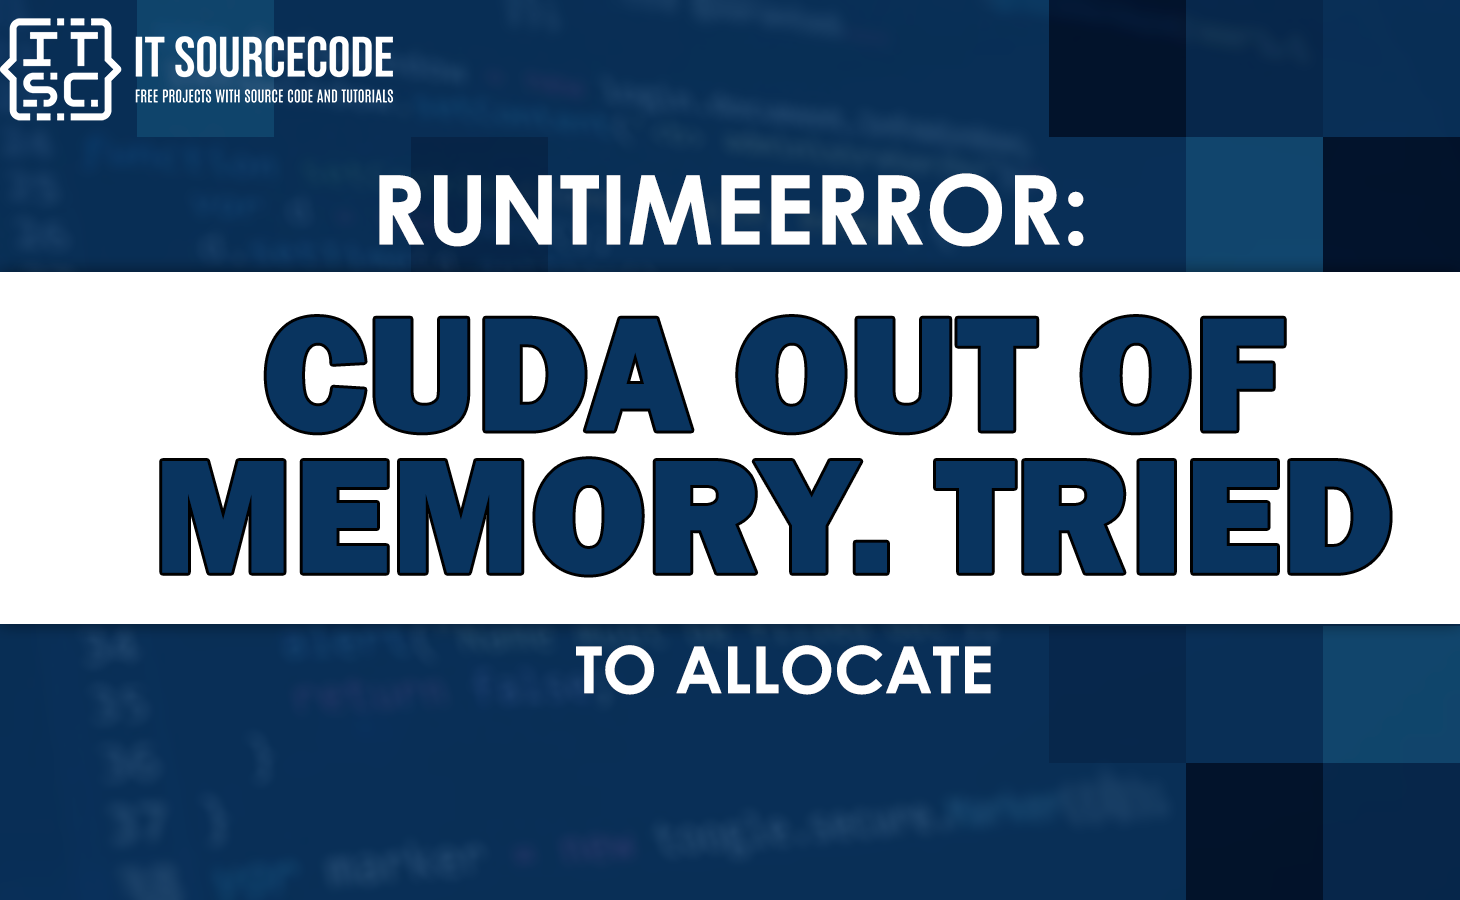 Runtimeerror cuda out of memory. tried to allocate